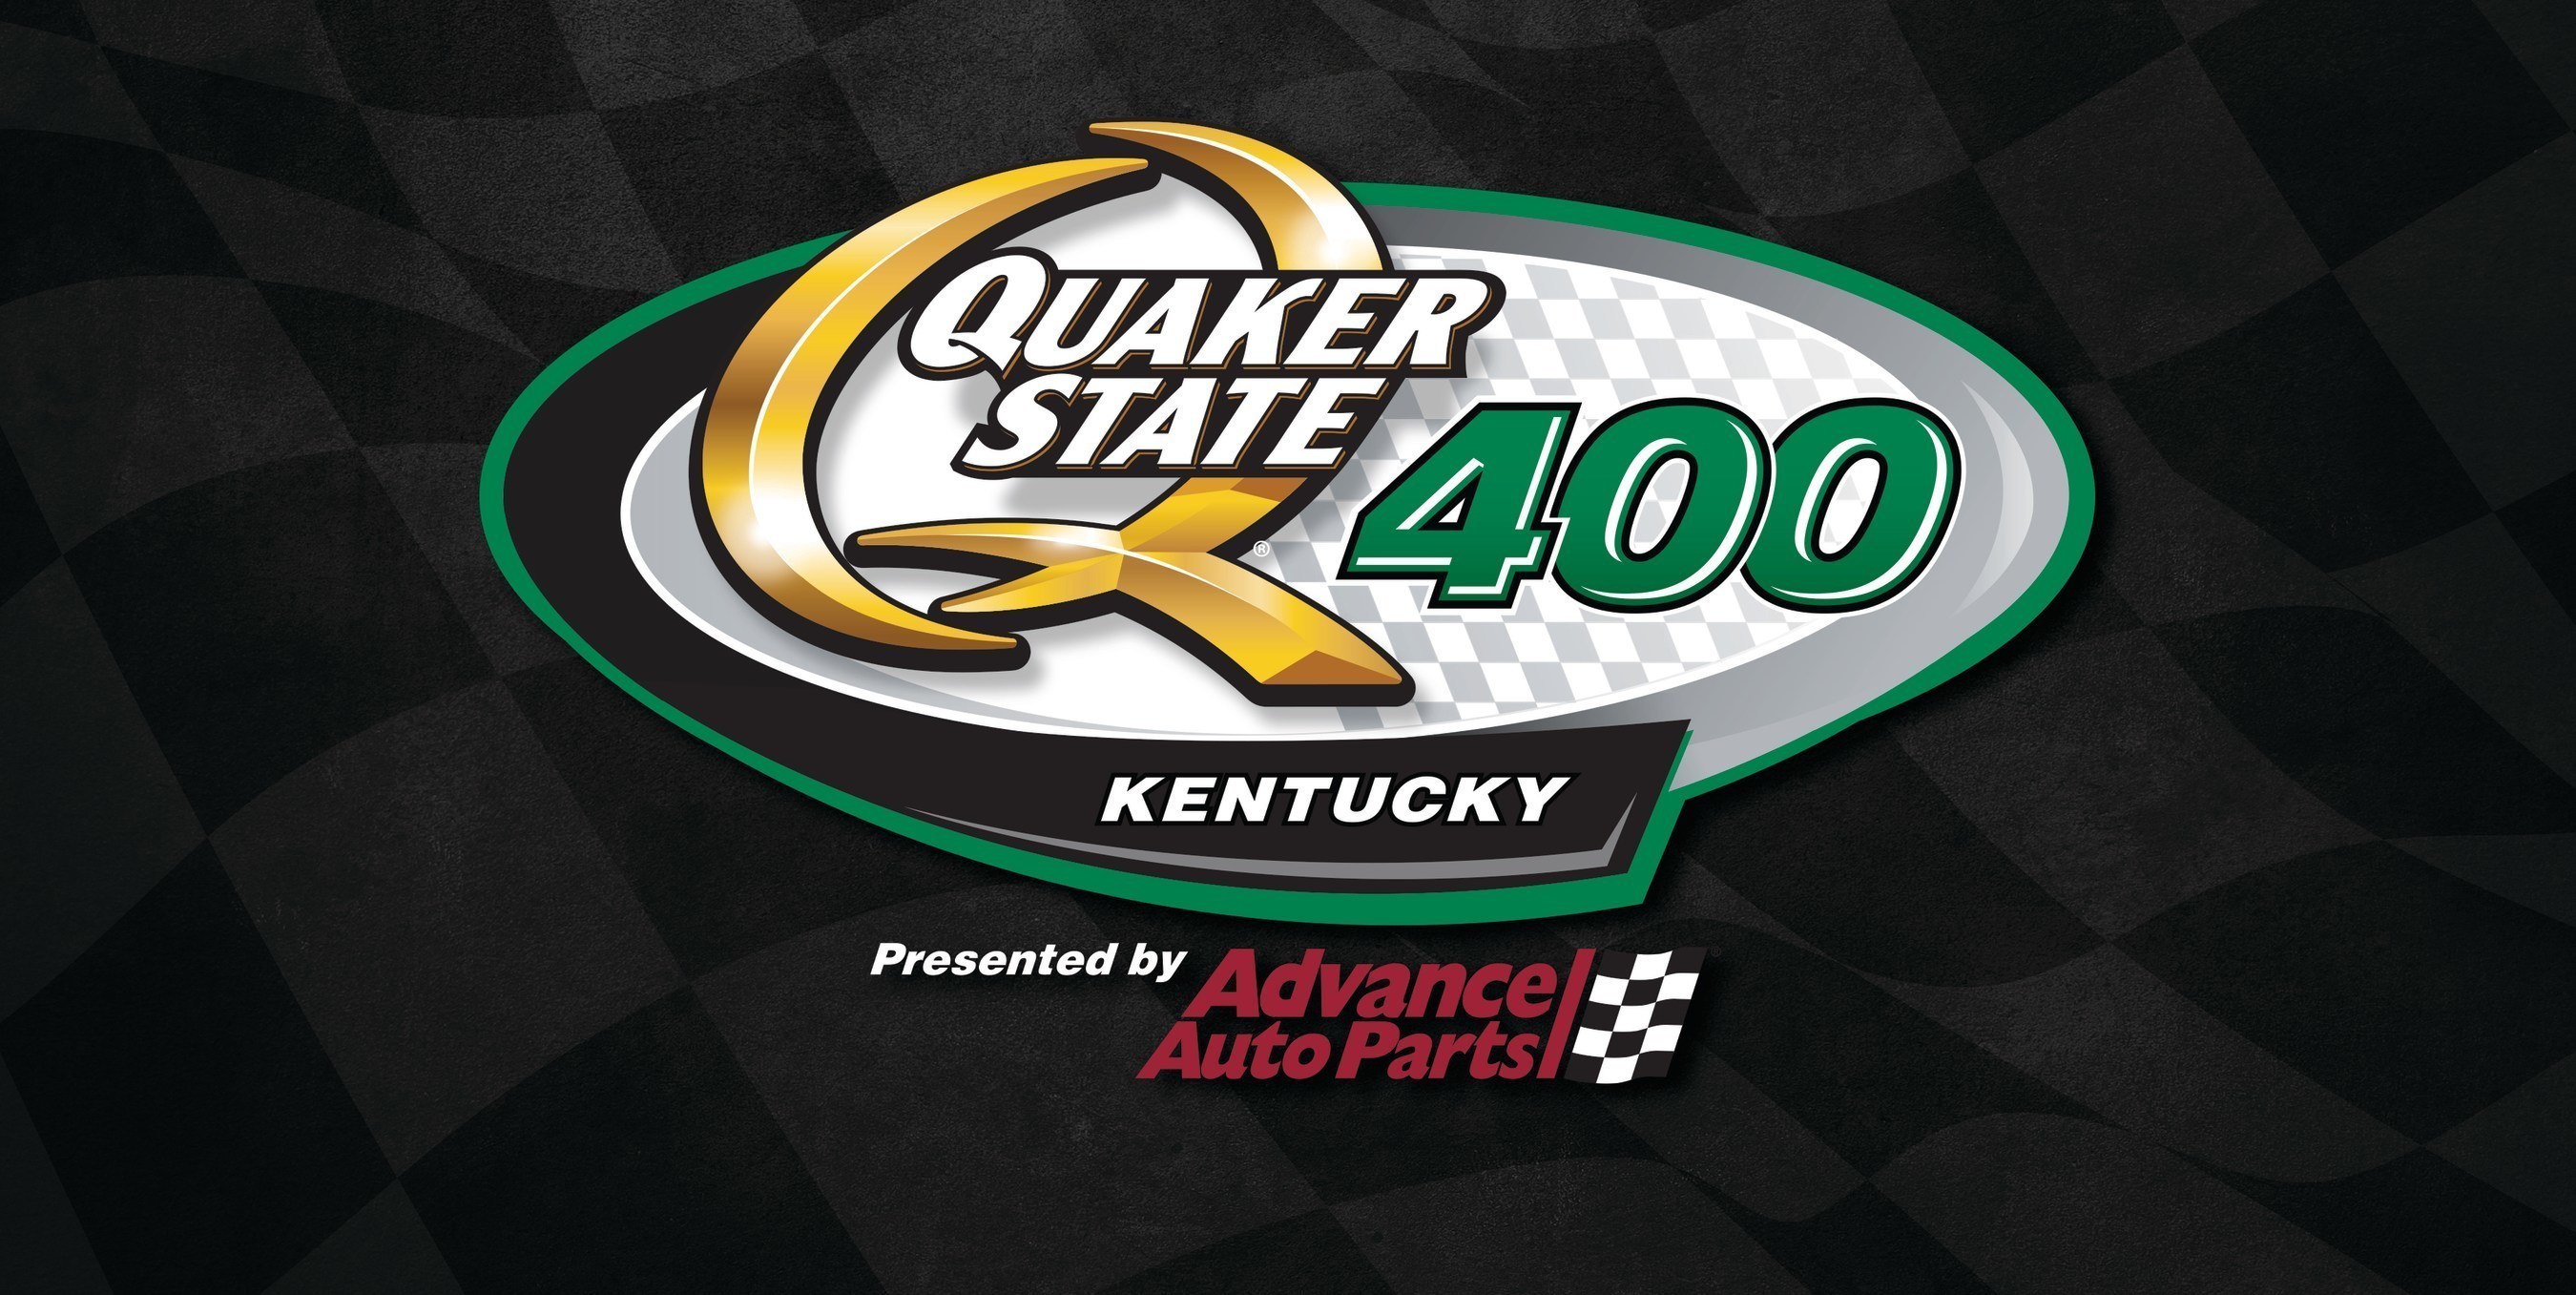 Quaker State® Returns To The Bluegrass State For 6th Annual Sprint Cup Series Race